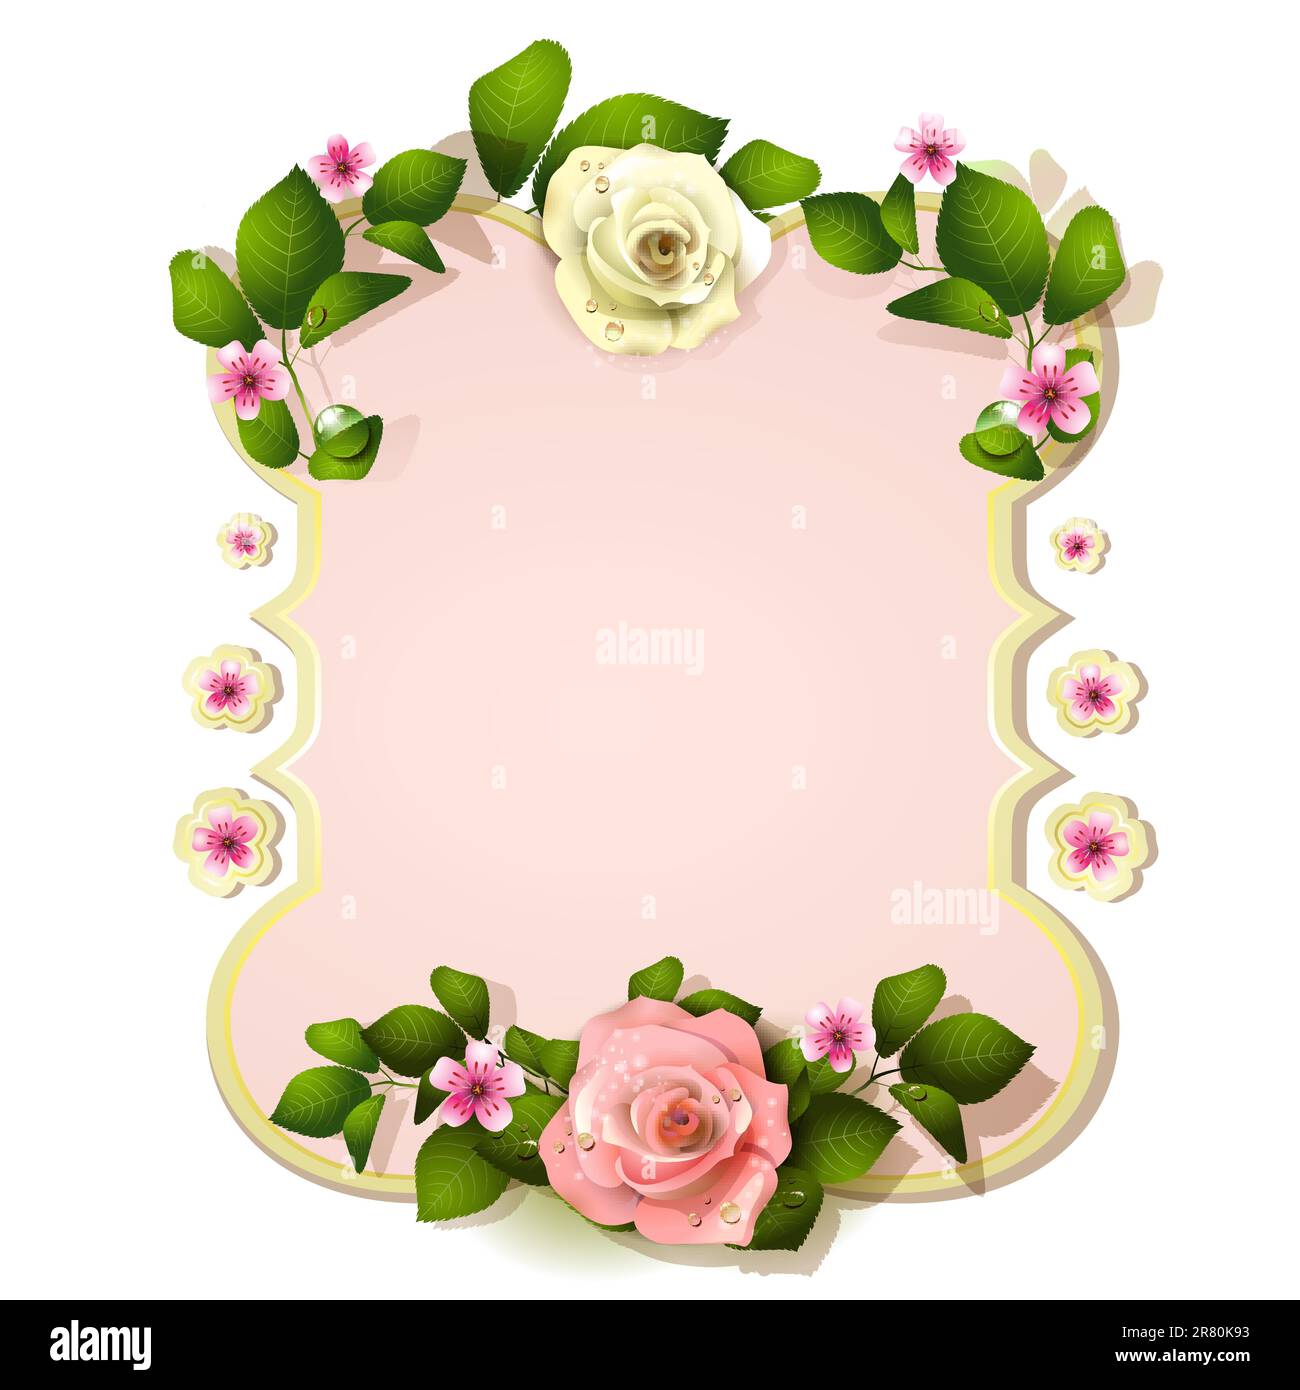 Mirror with white and pink roses Stock Vector